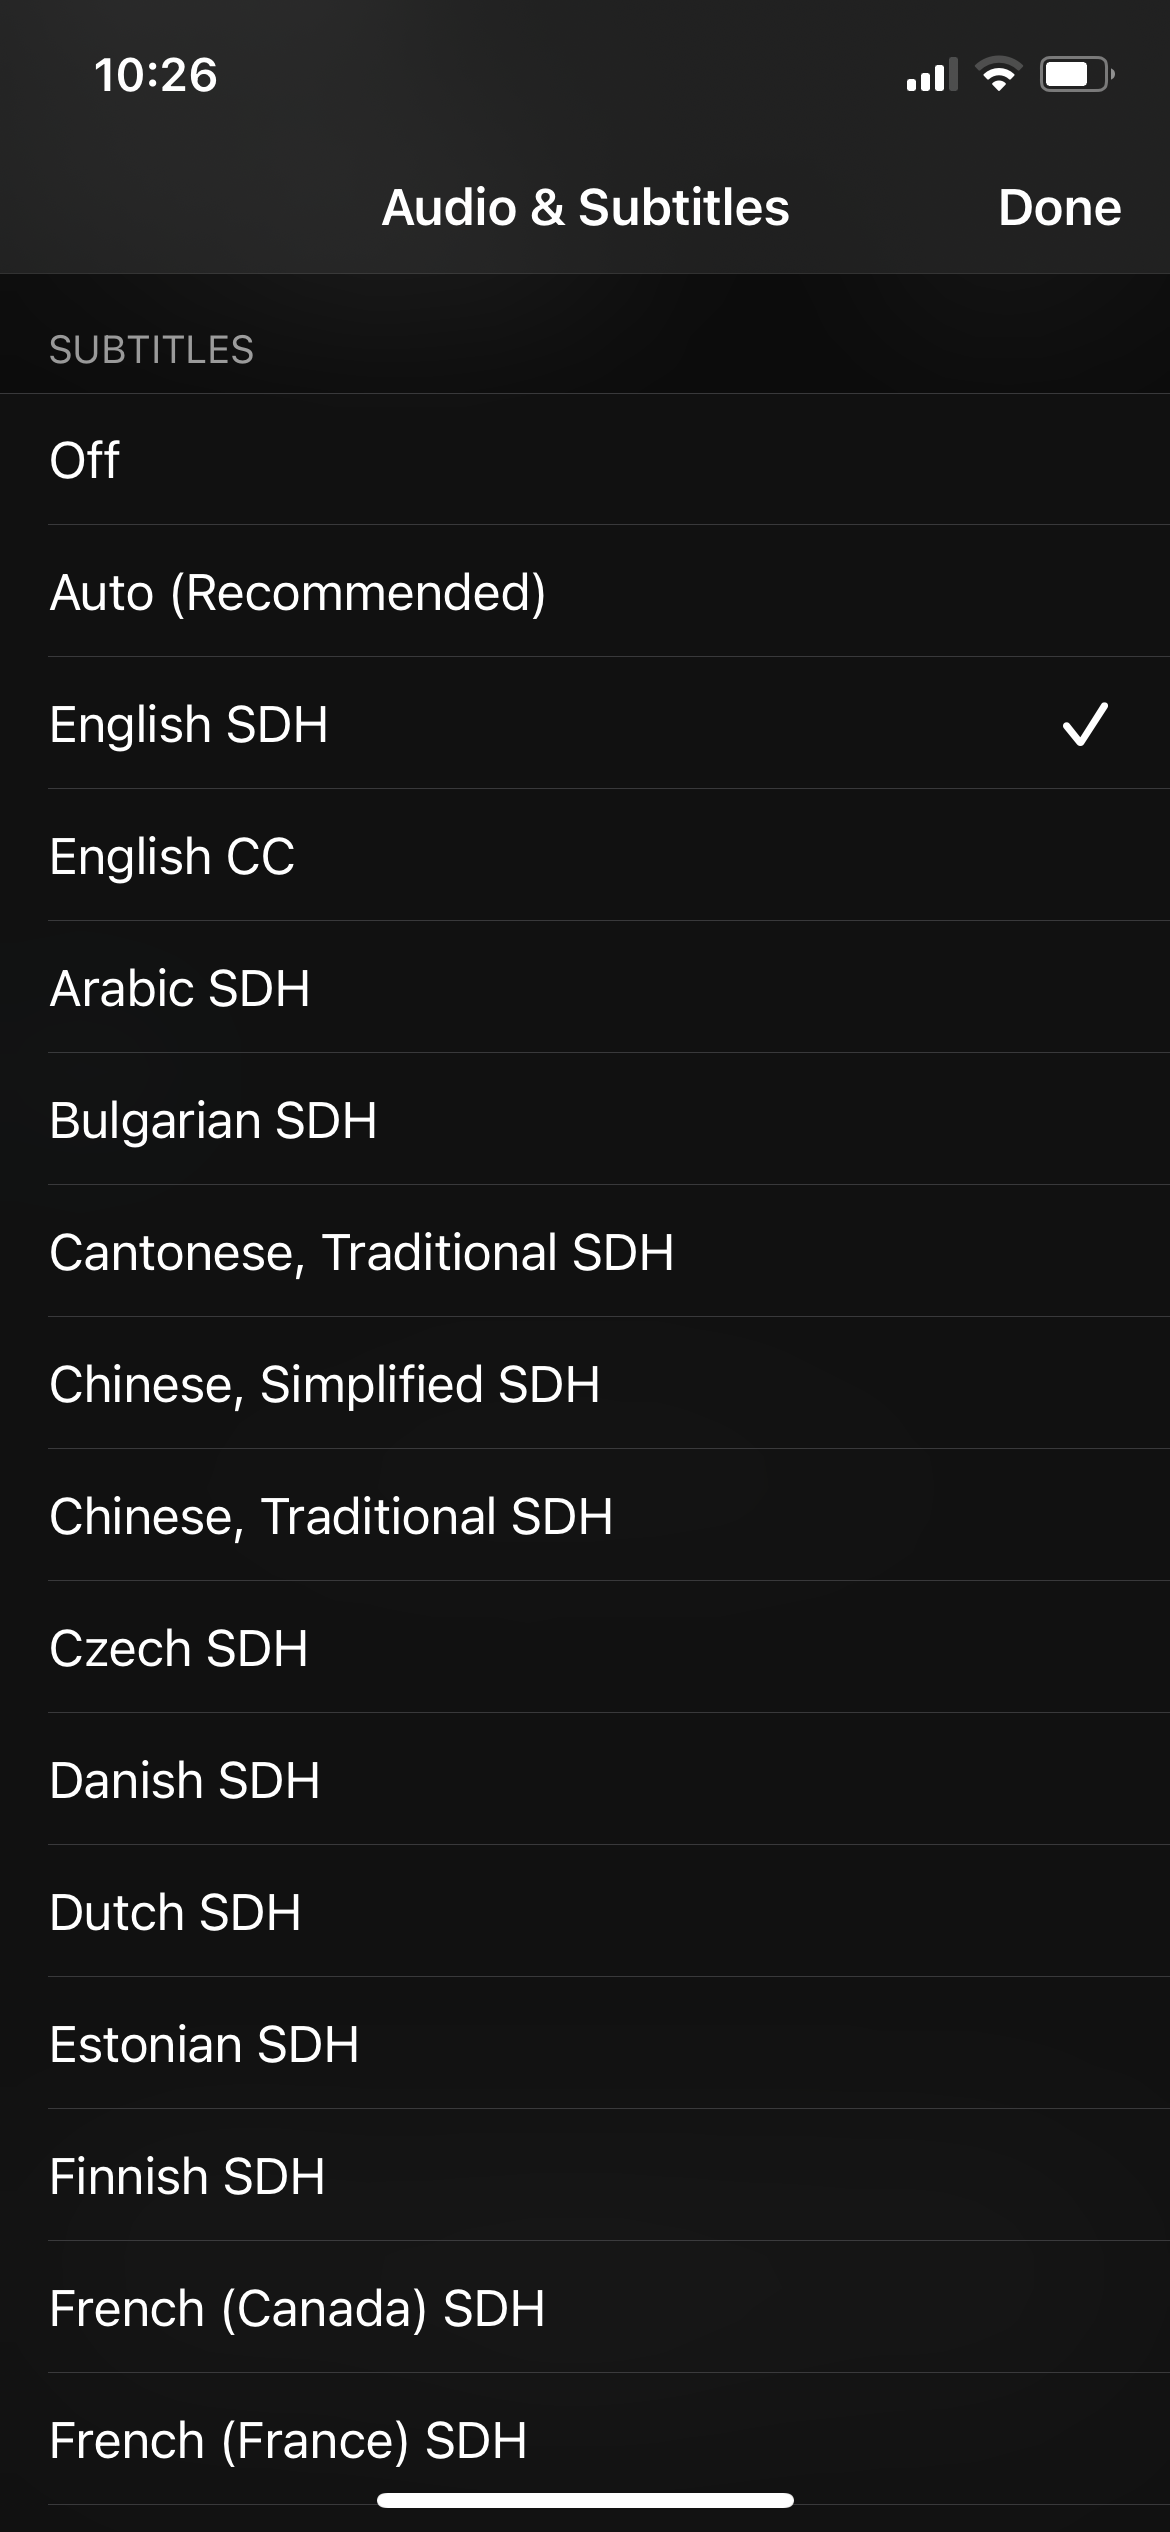 Subtitles with SDH turned on